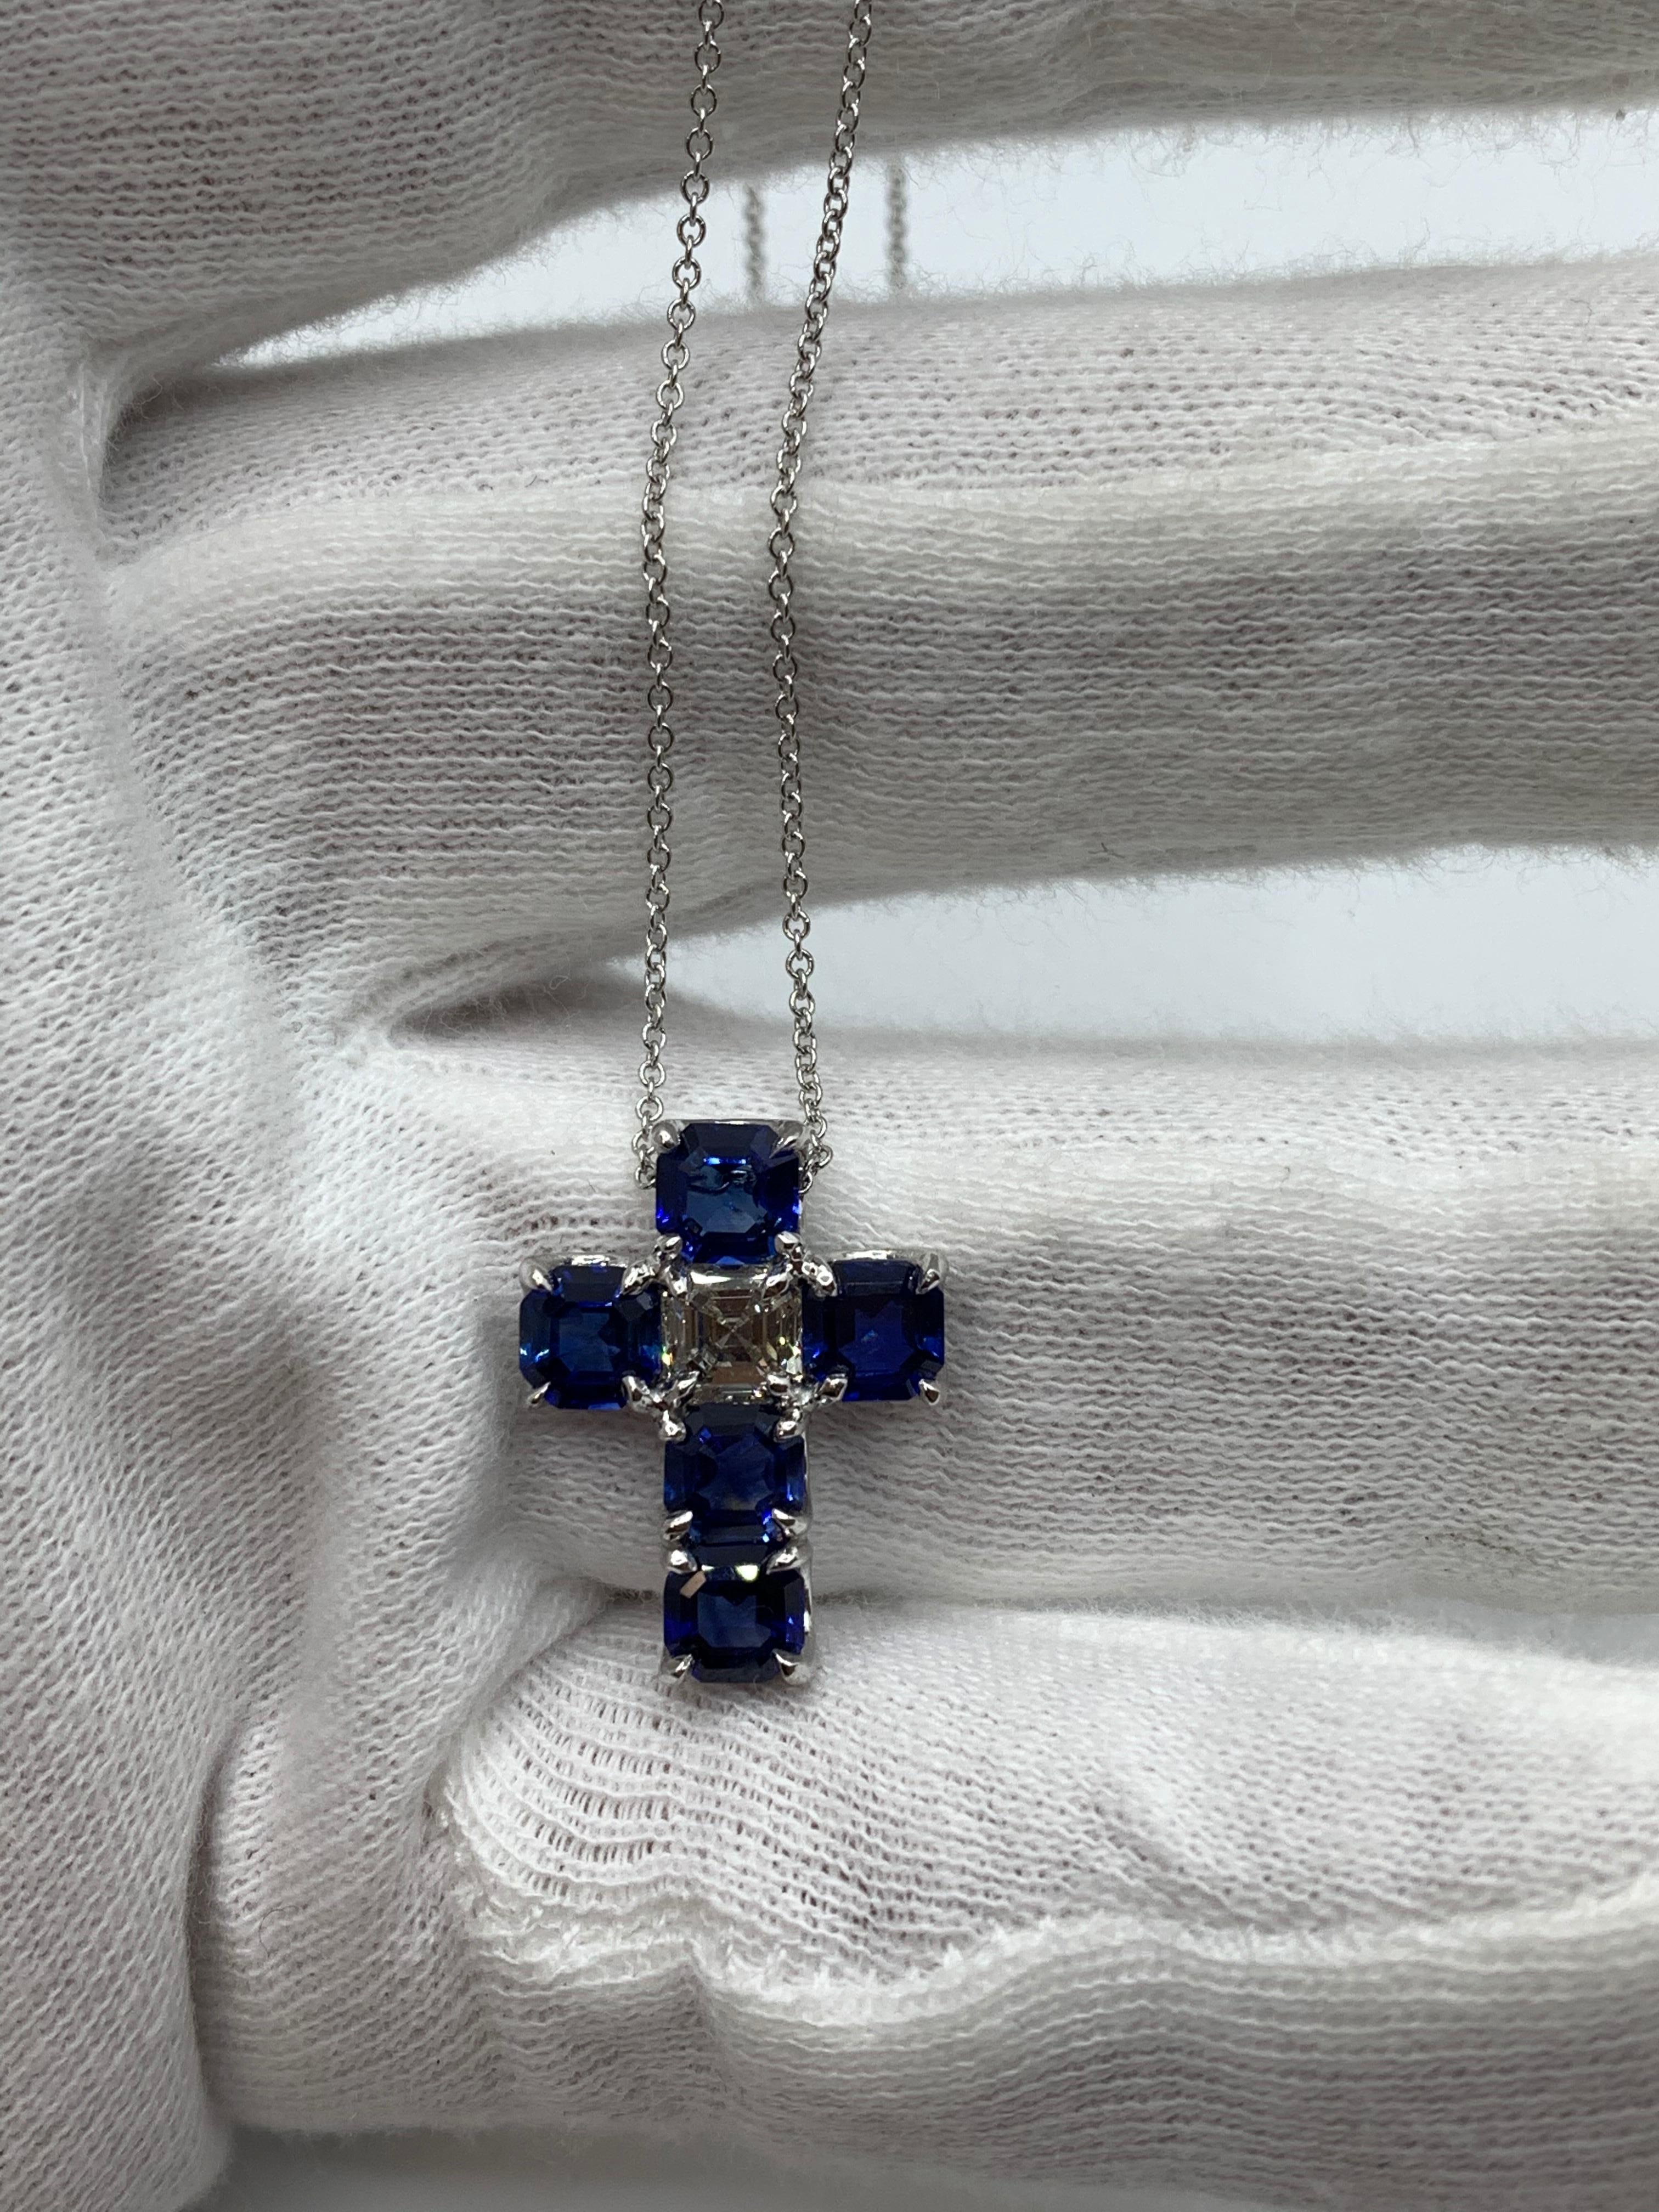 Asscher Cut Sapphires and White Asscher Cut Diamond set in this beautiful and minimalistic Cross. Set with very little metal to allow light to pass from all angles for maximum brilliance.
5 Sapphires weighing 4.03 Carat.
1 Diamond Weighing 0.75